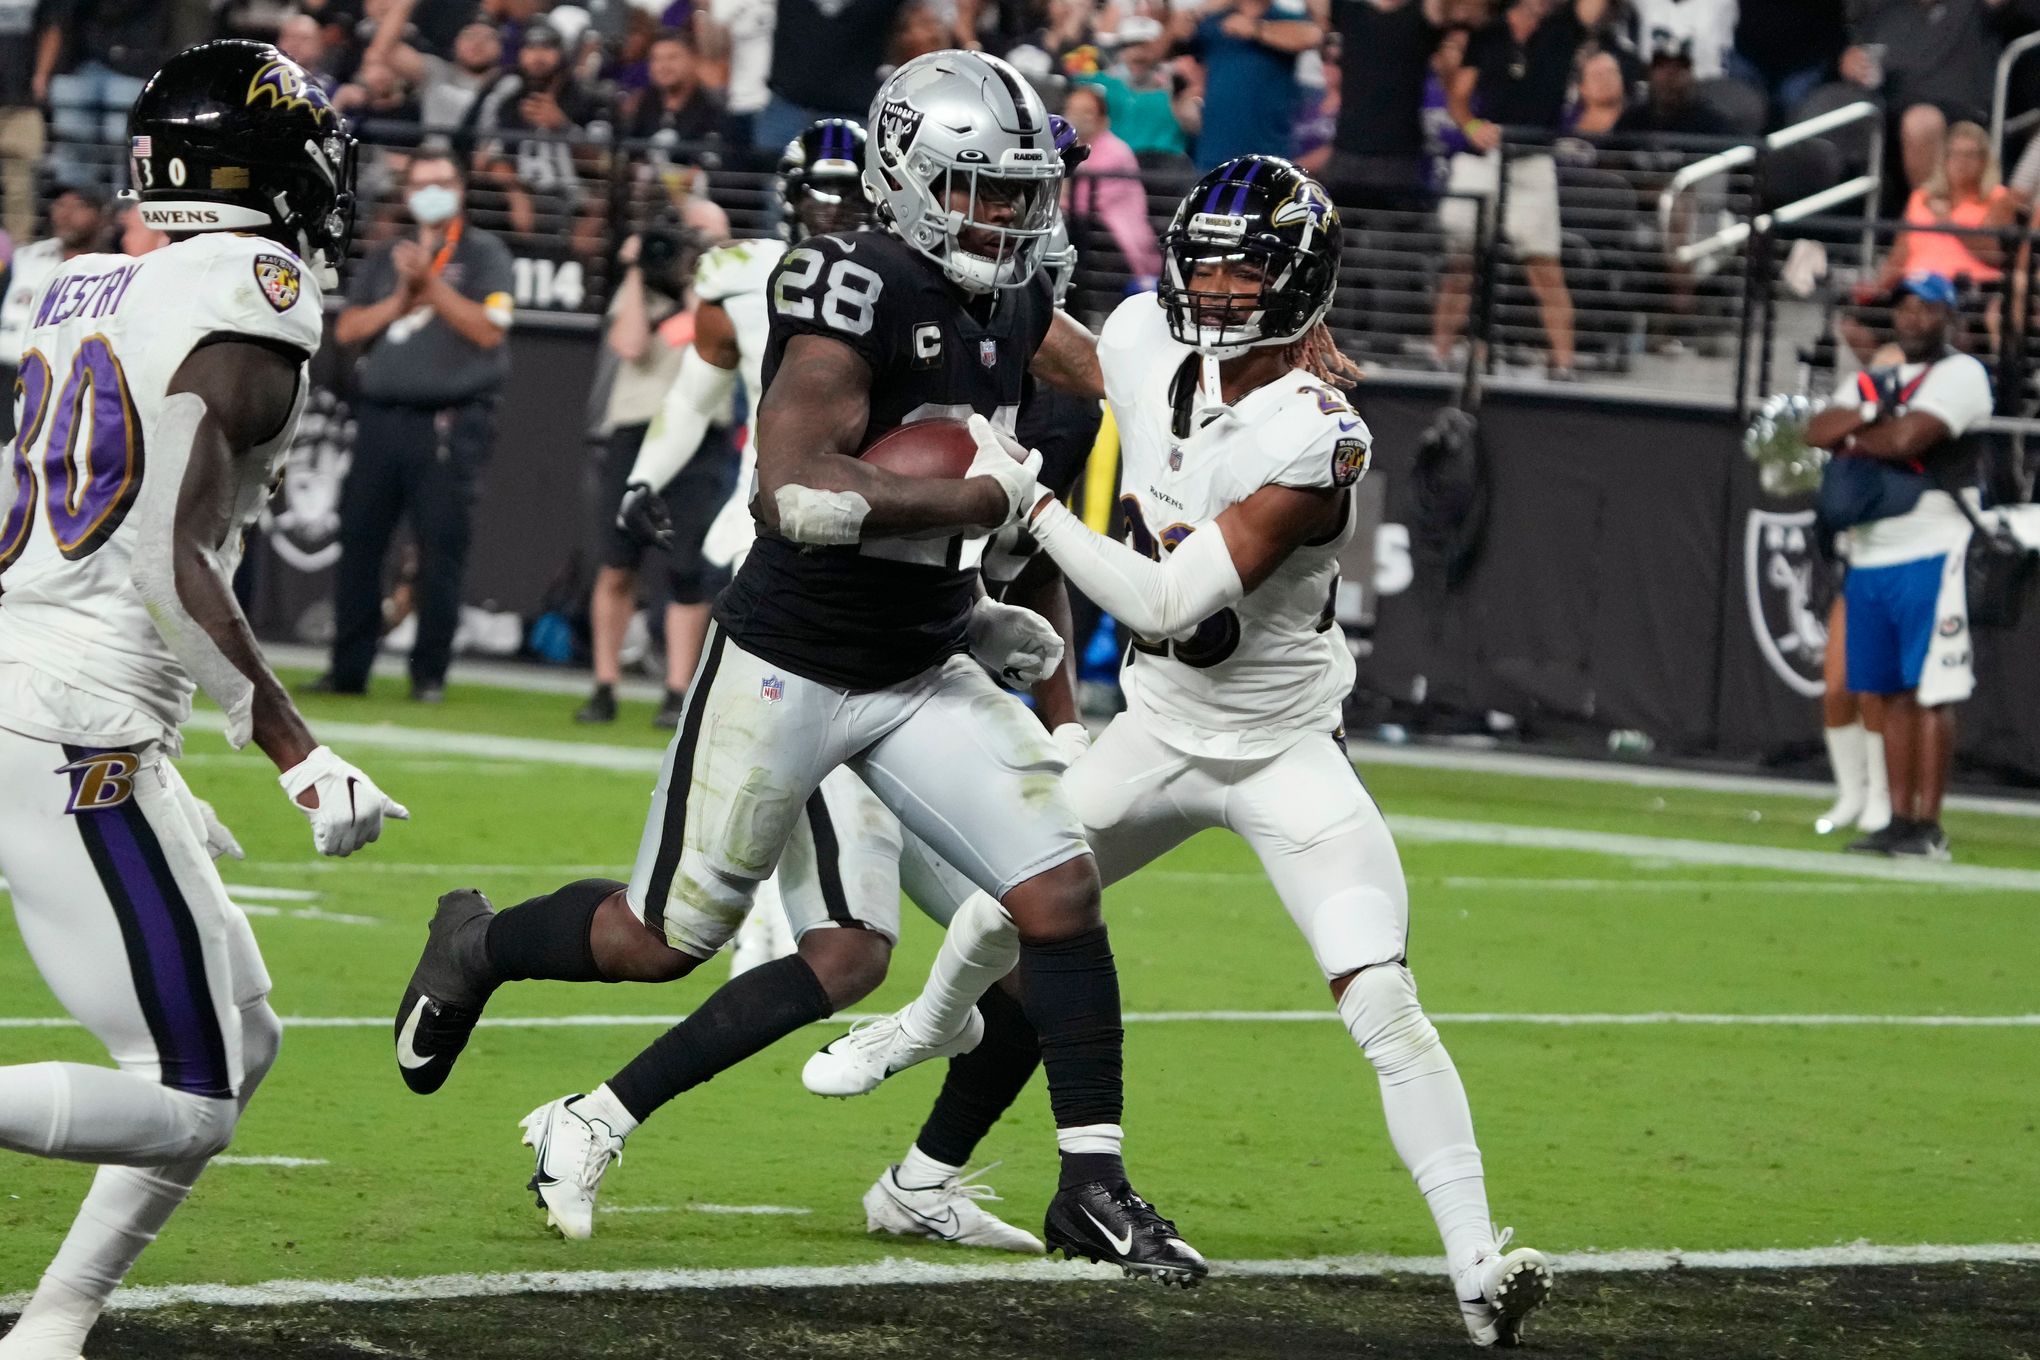 Raiders RB Josh Jacobs out vs Steelers with injury